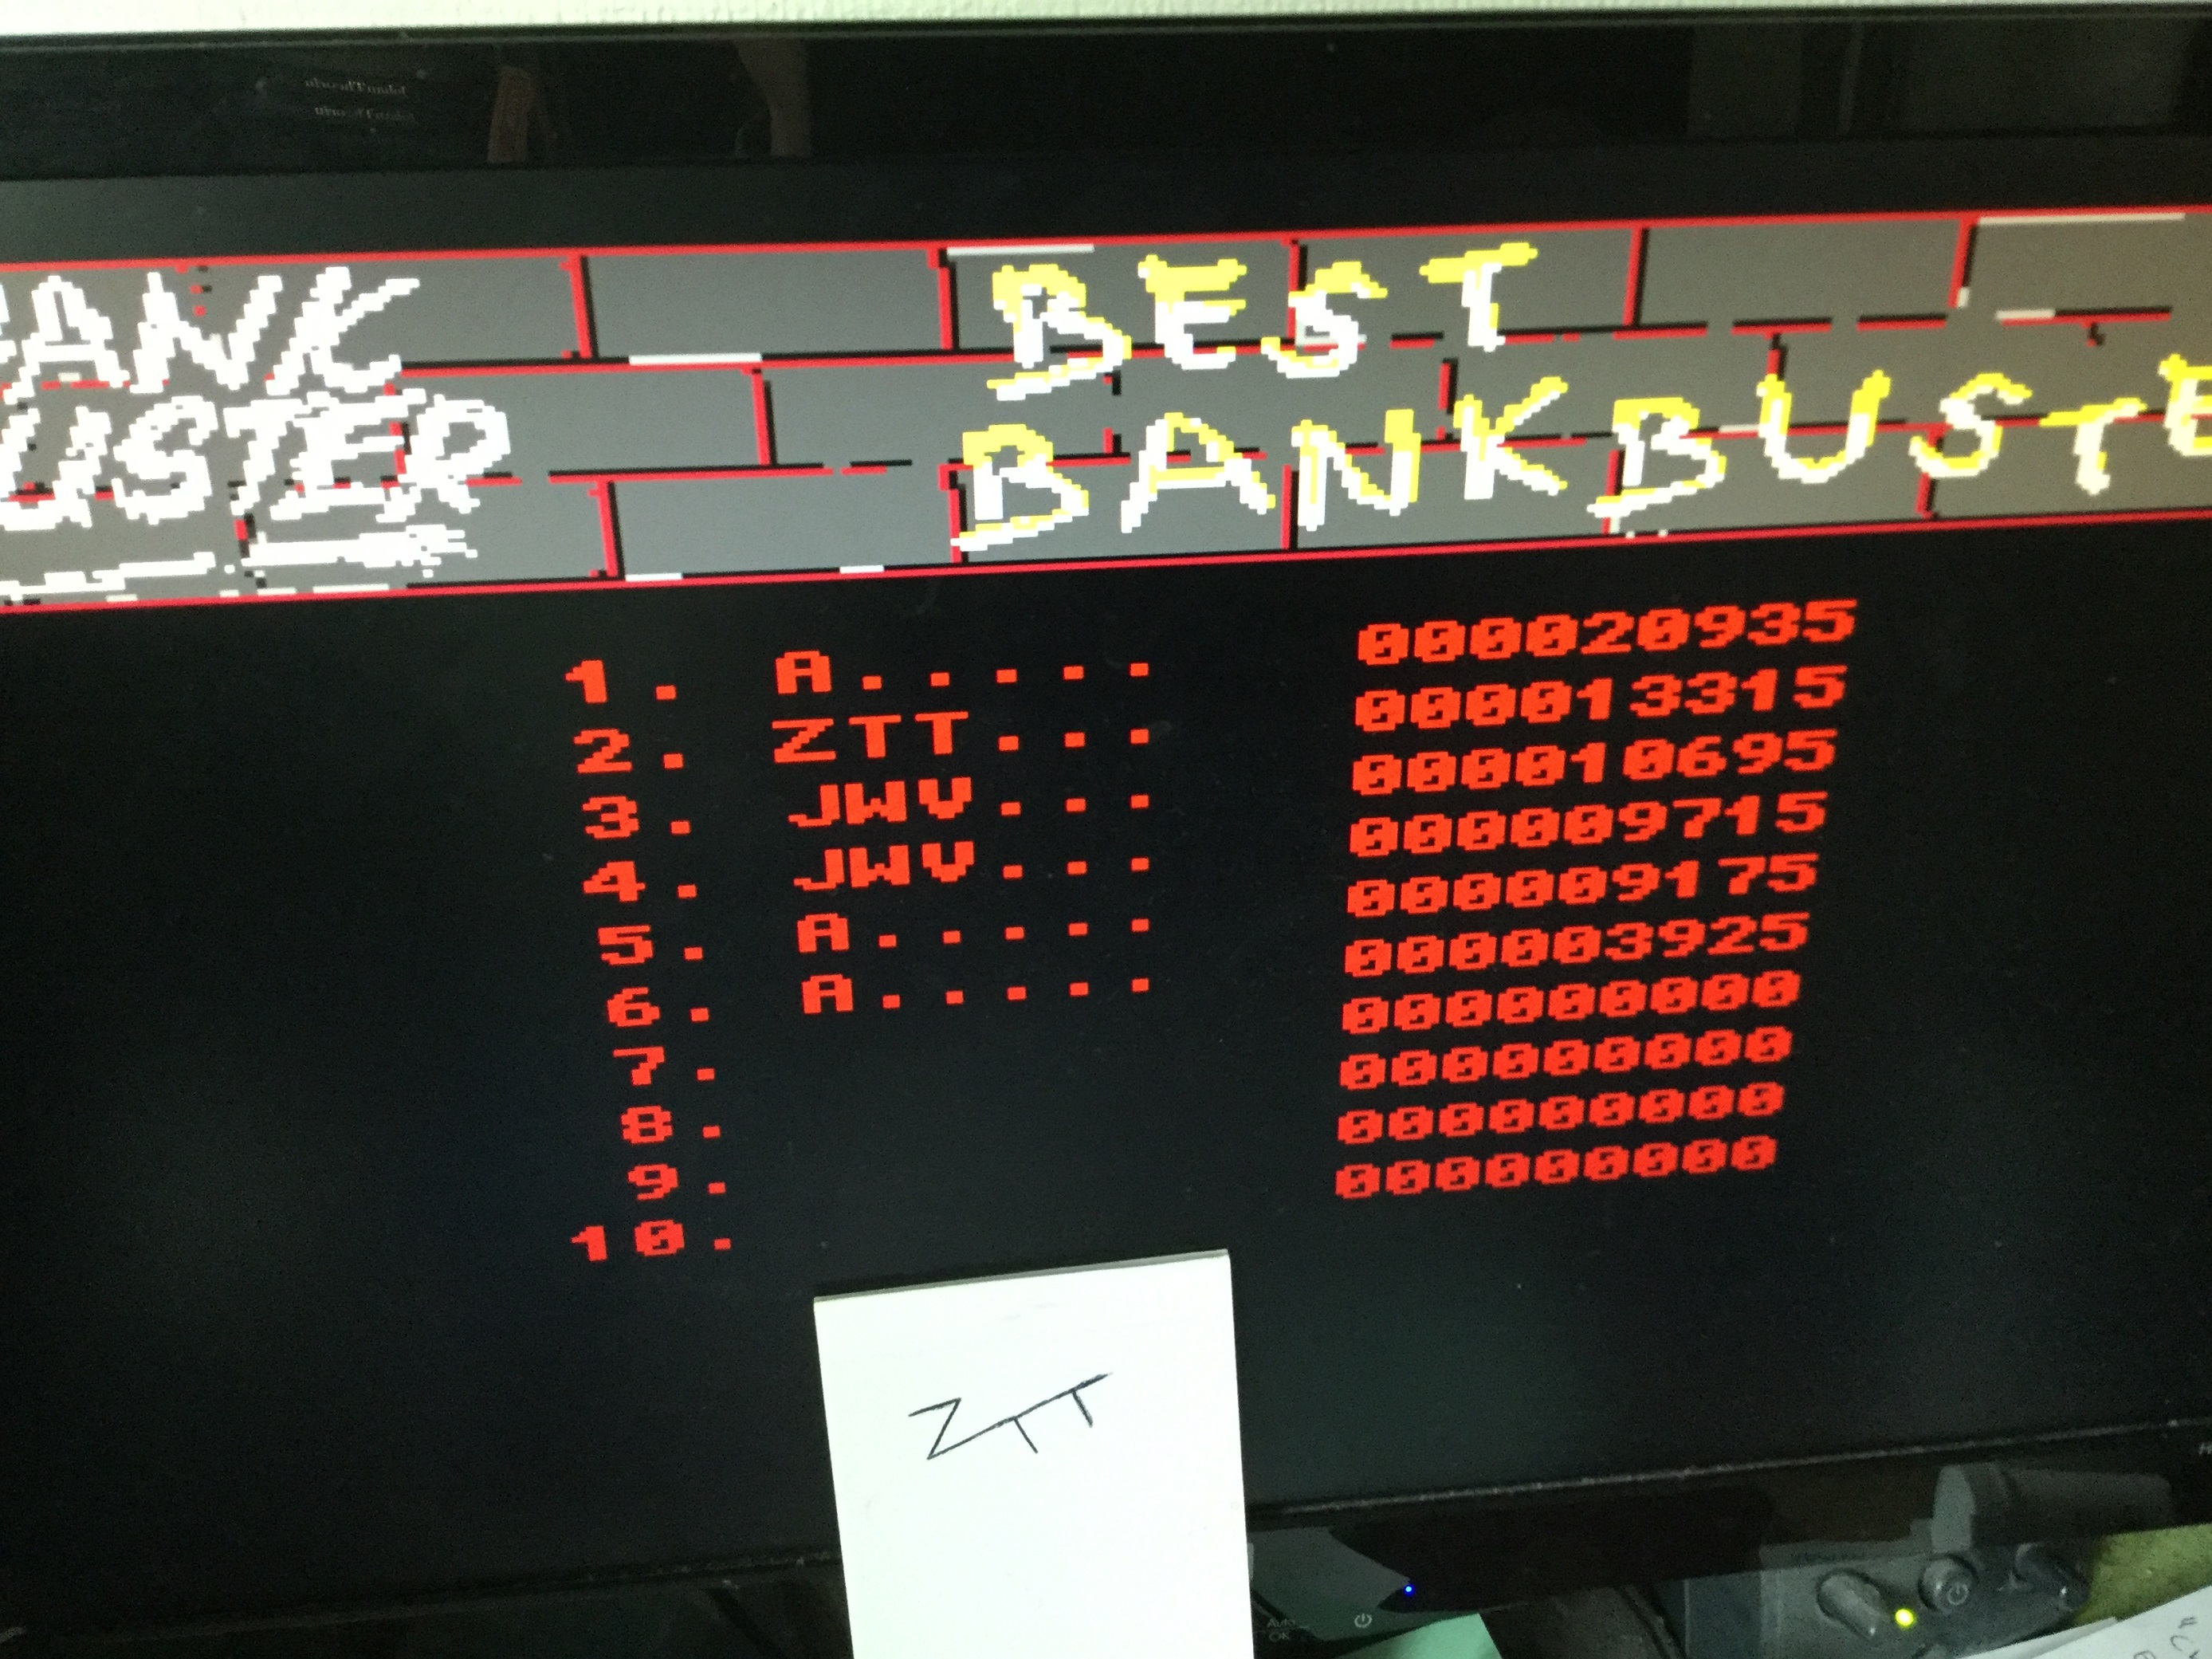 Frankie: Bank Buster [Normal Speed] (Amiga Emulated) 13,315 points on 2022-11-13 05:35:17